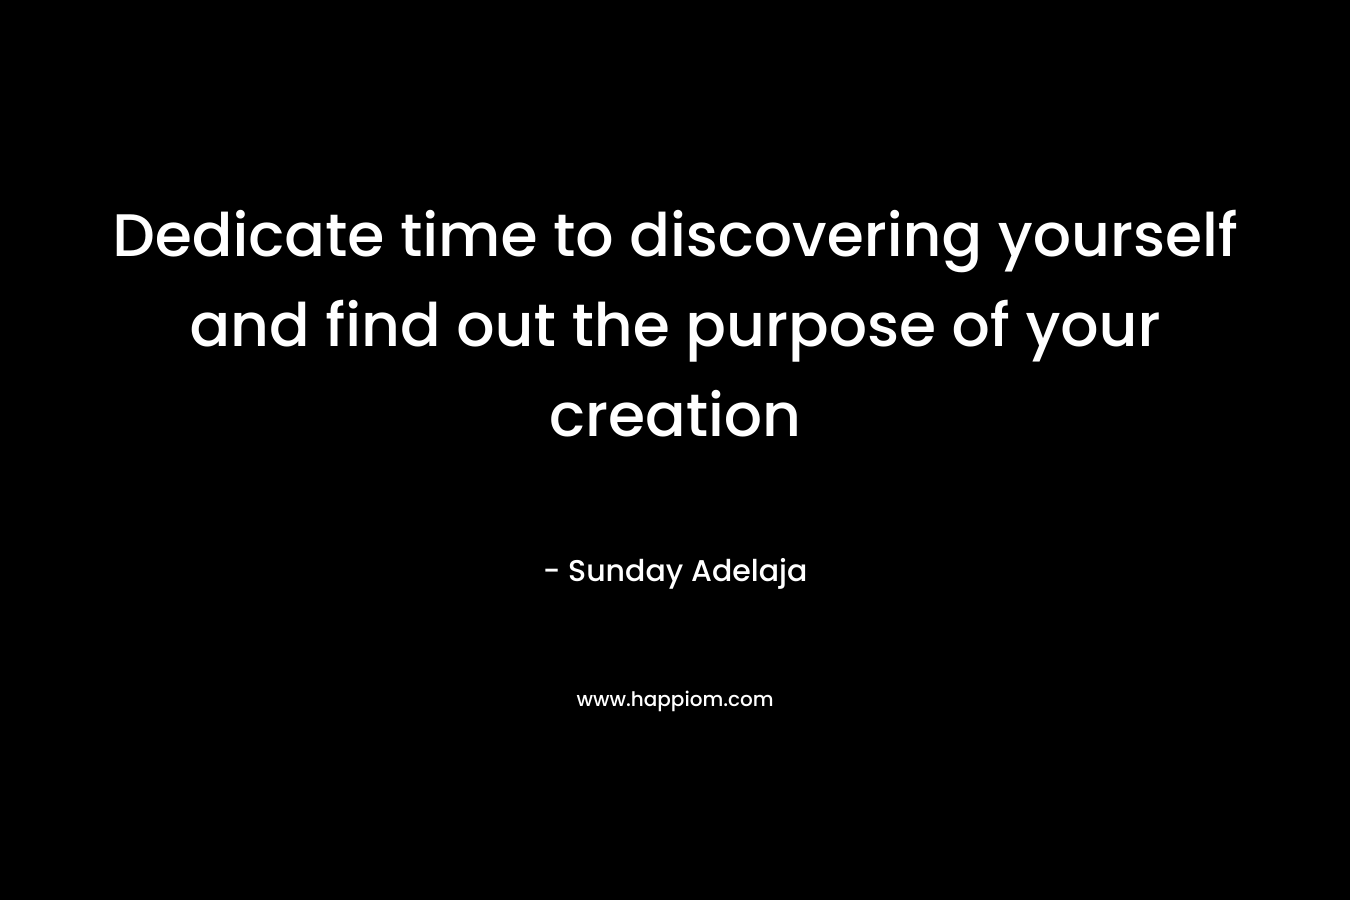 Dedicate time to discovering yourself and find out the purpose of your creation – Sunday Adelaja